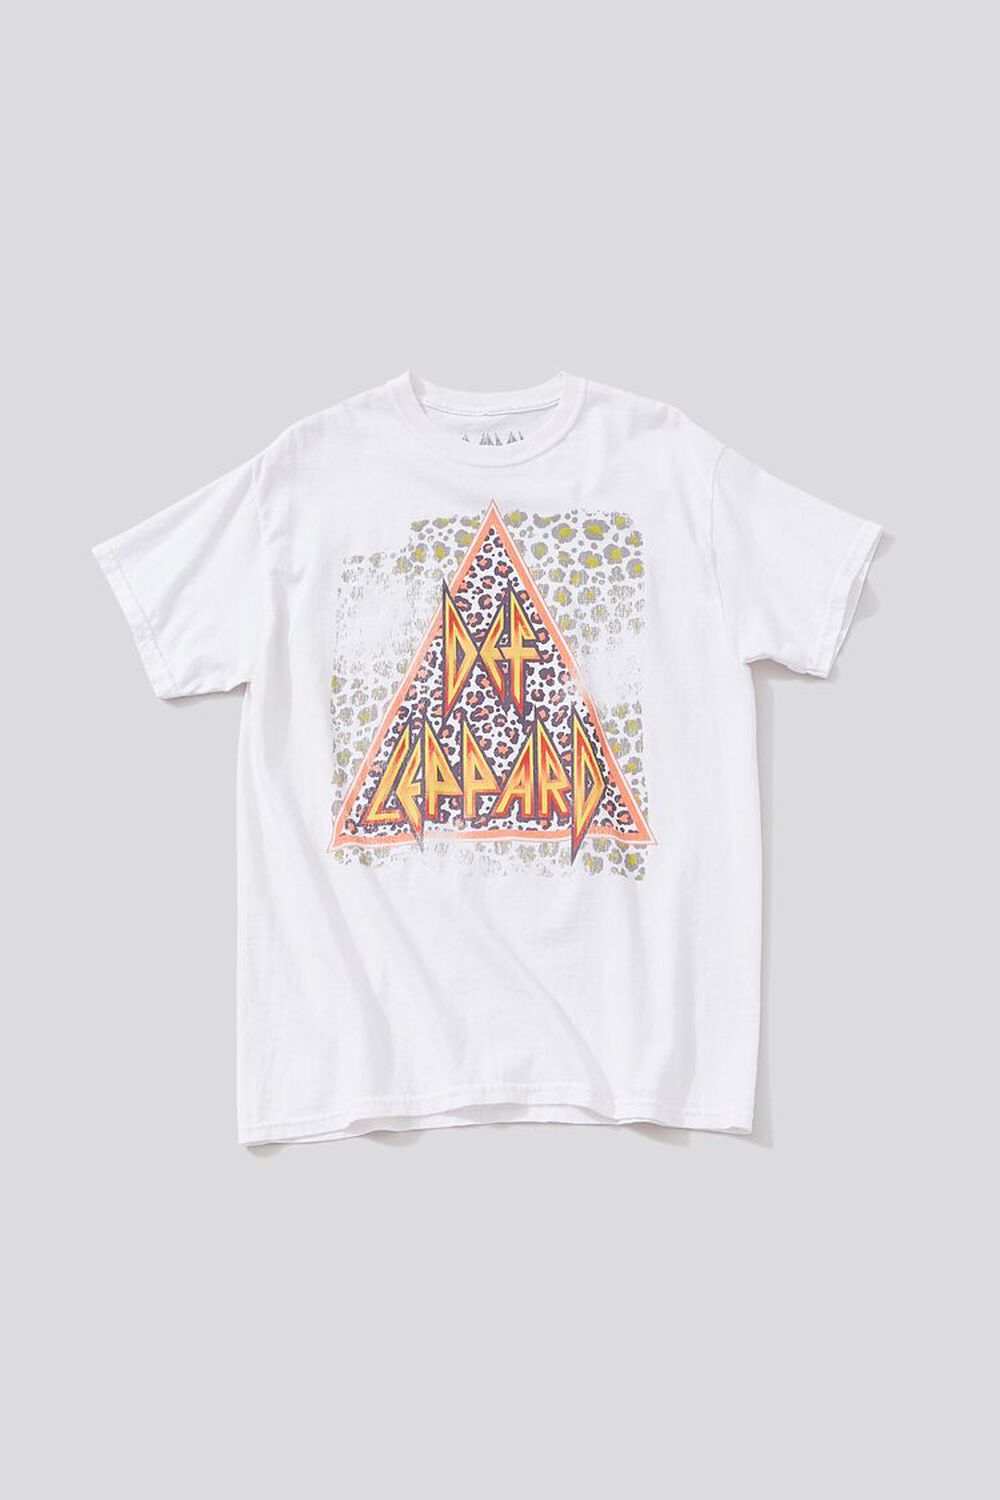 WHITE/MULTI Def Leppard Graphic Tee, image 1